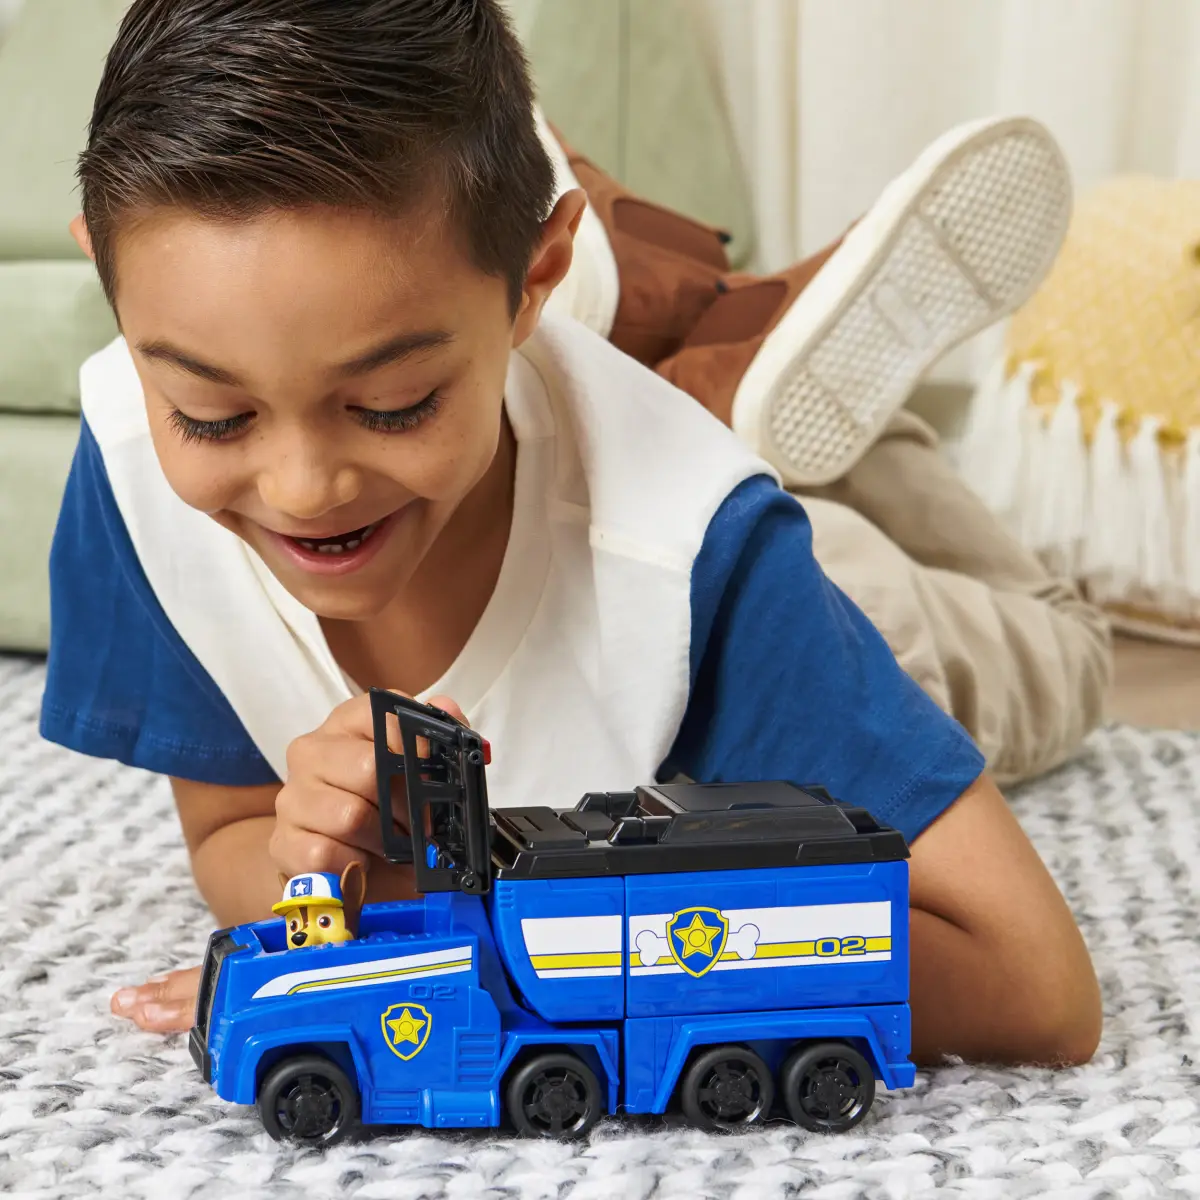 Paw Patrol, Big Truck Pup’S Chase Transforming Toy Trucks With Collectible Action Figure, Kids Toys For Ages 3 And Up